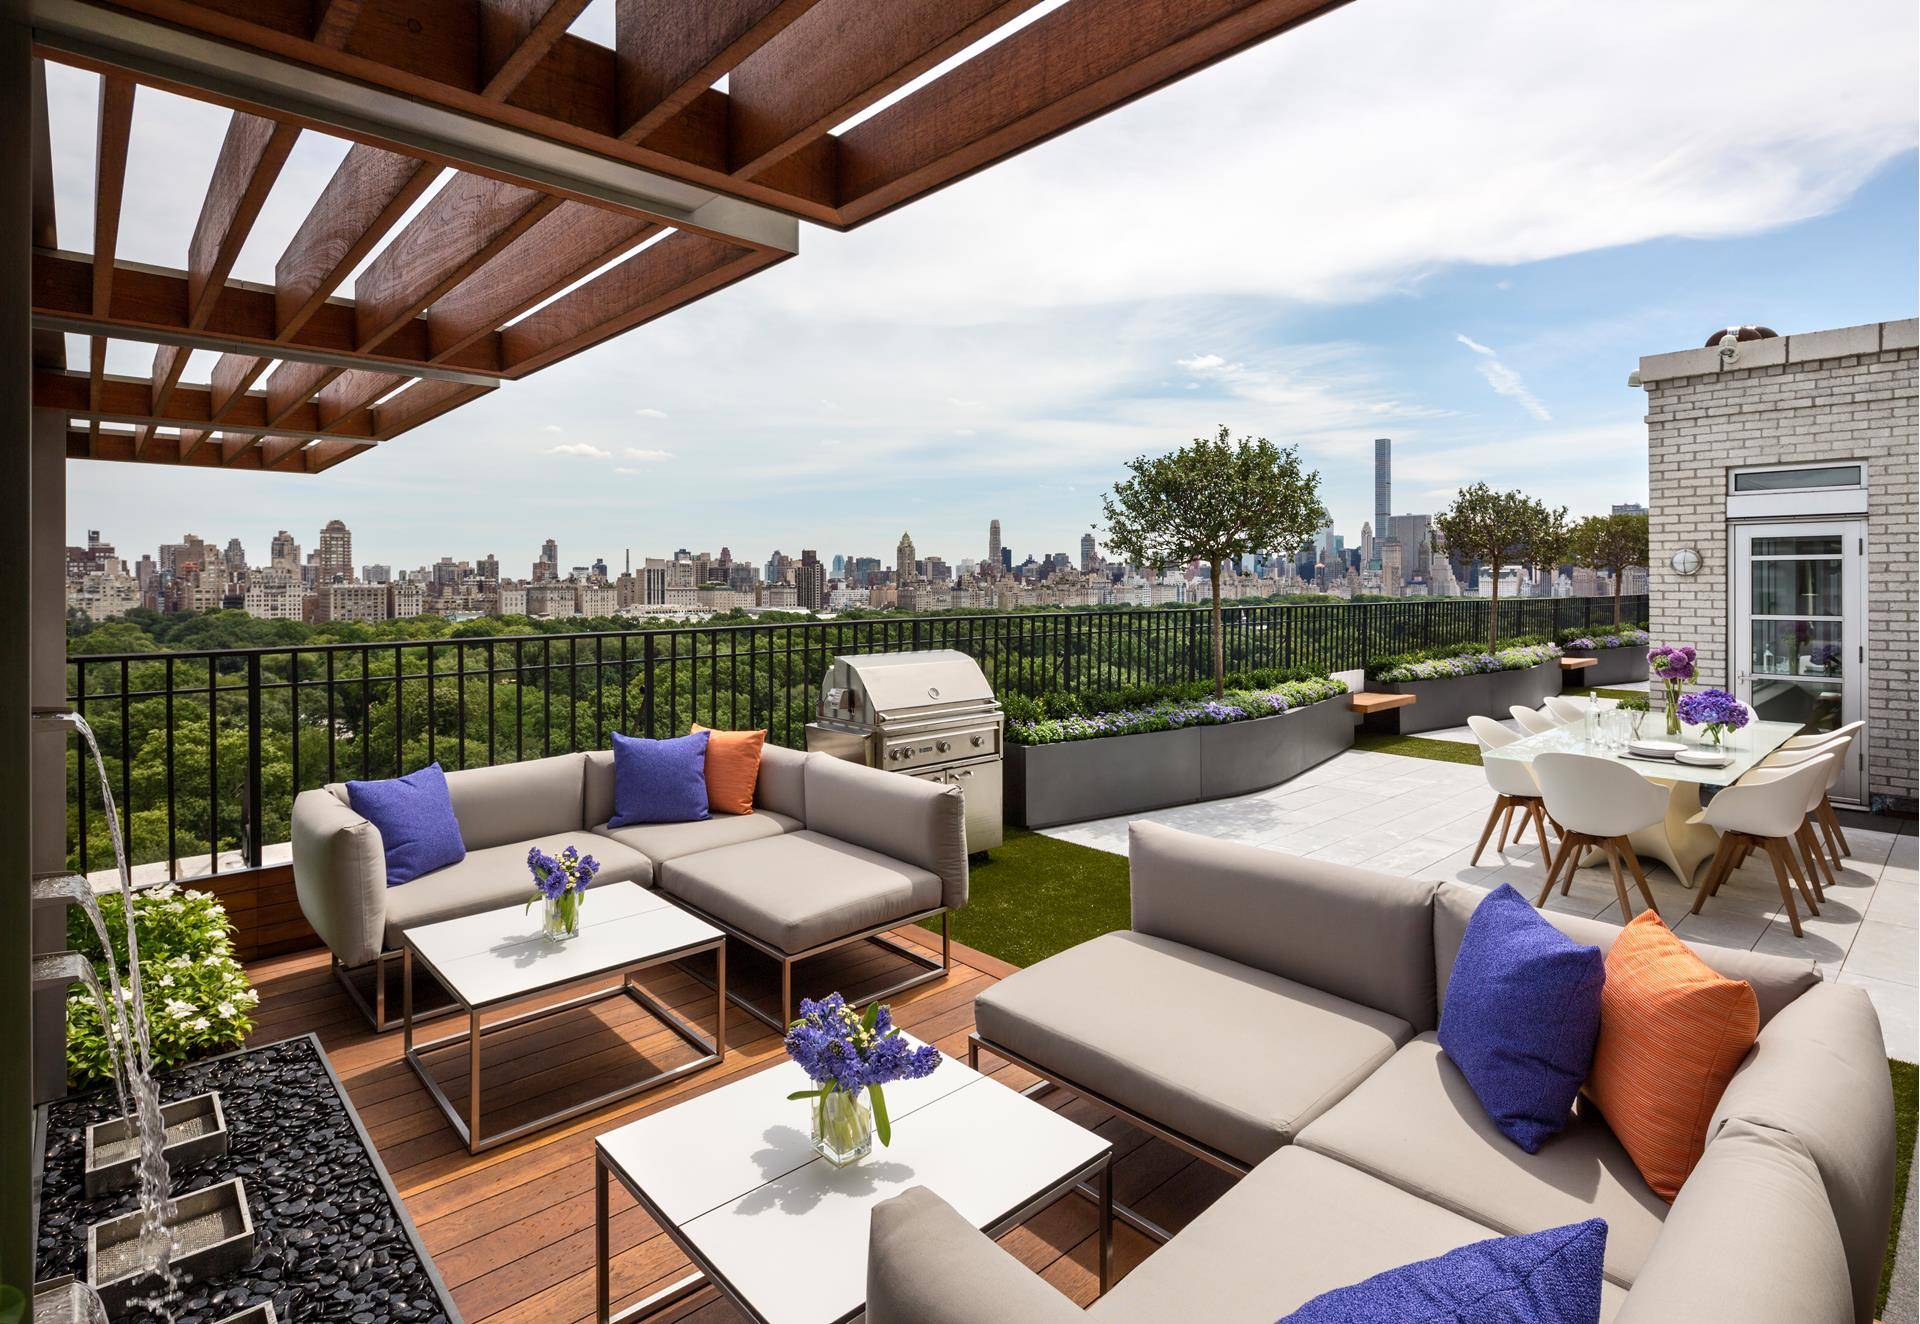 Perched high above Central Park, this award winning penthouse boasts one of the most spectacularly landscaped, wrap around private terraces in Manhattan.